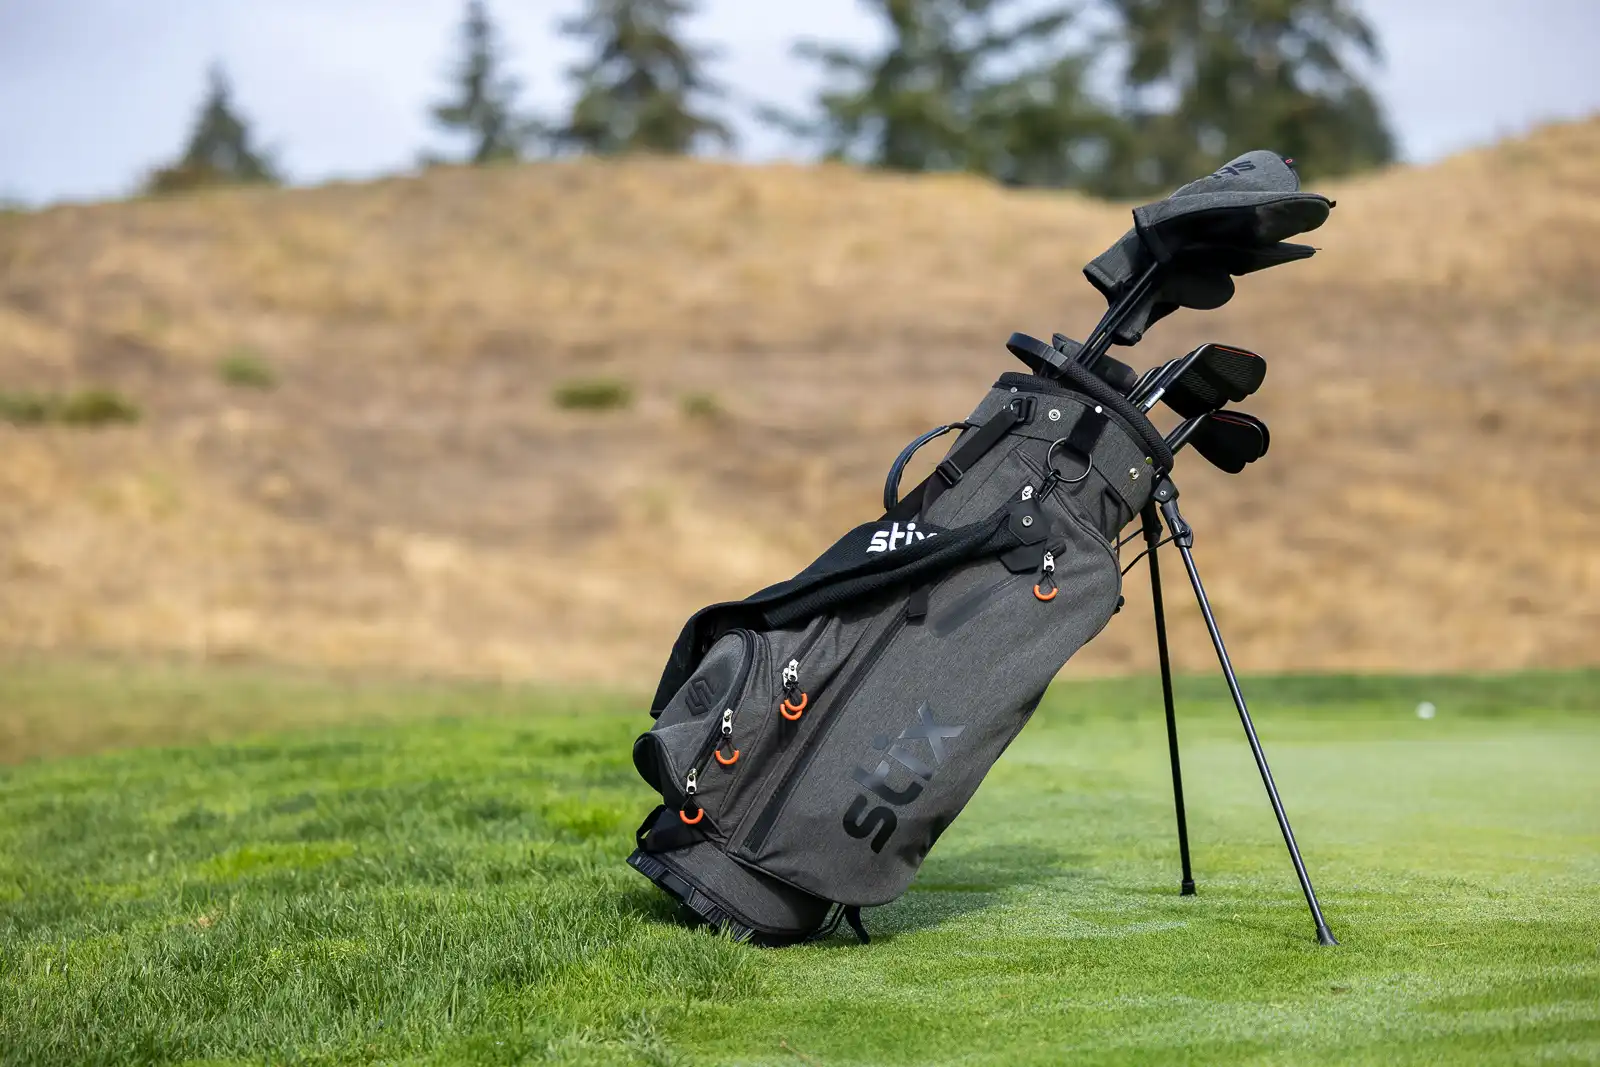 Stix Golf Clubs Review: they Value in